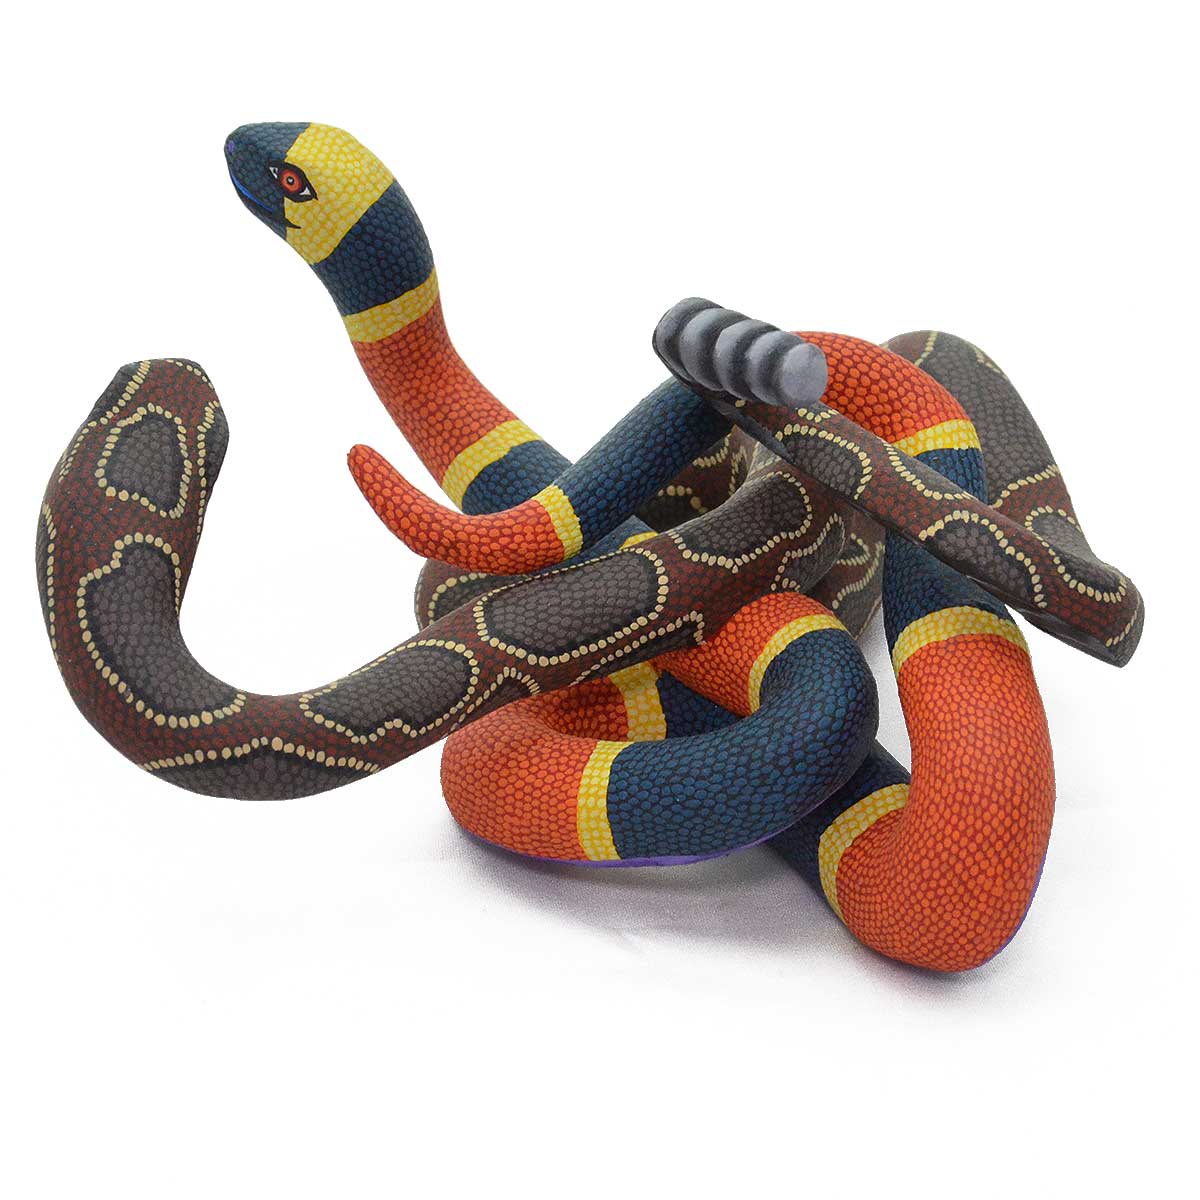 Eleazar Morales: Small Entwined Snakes | CulturalArt.org